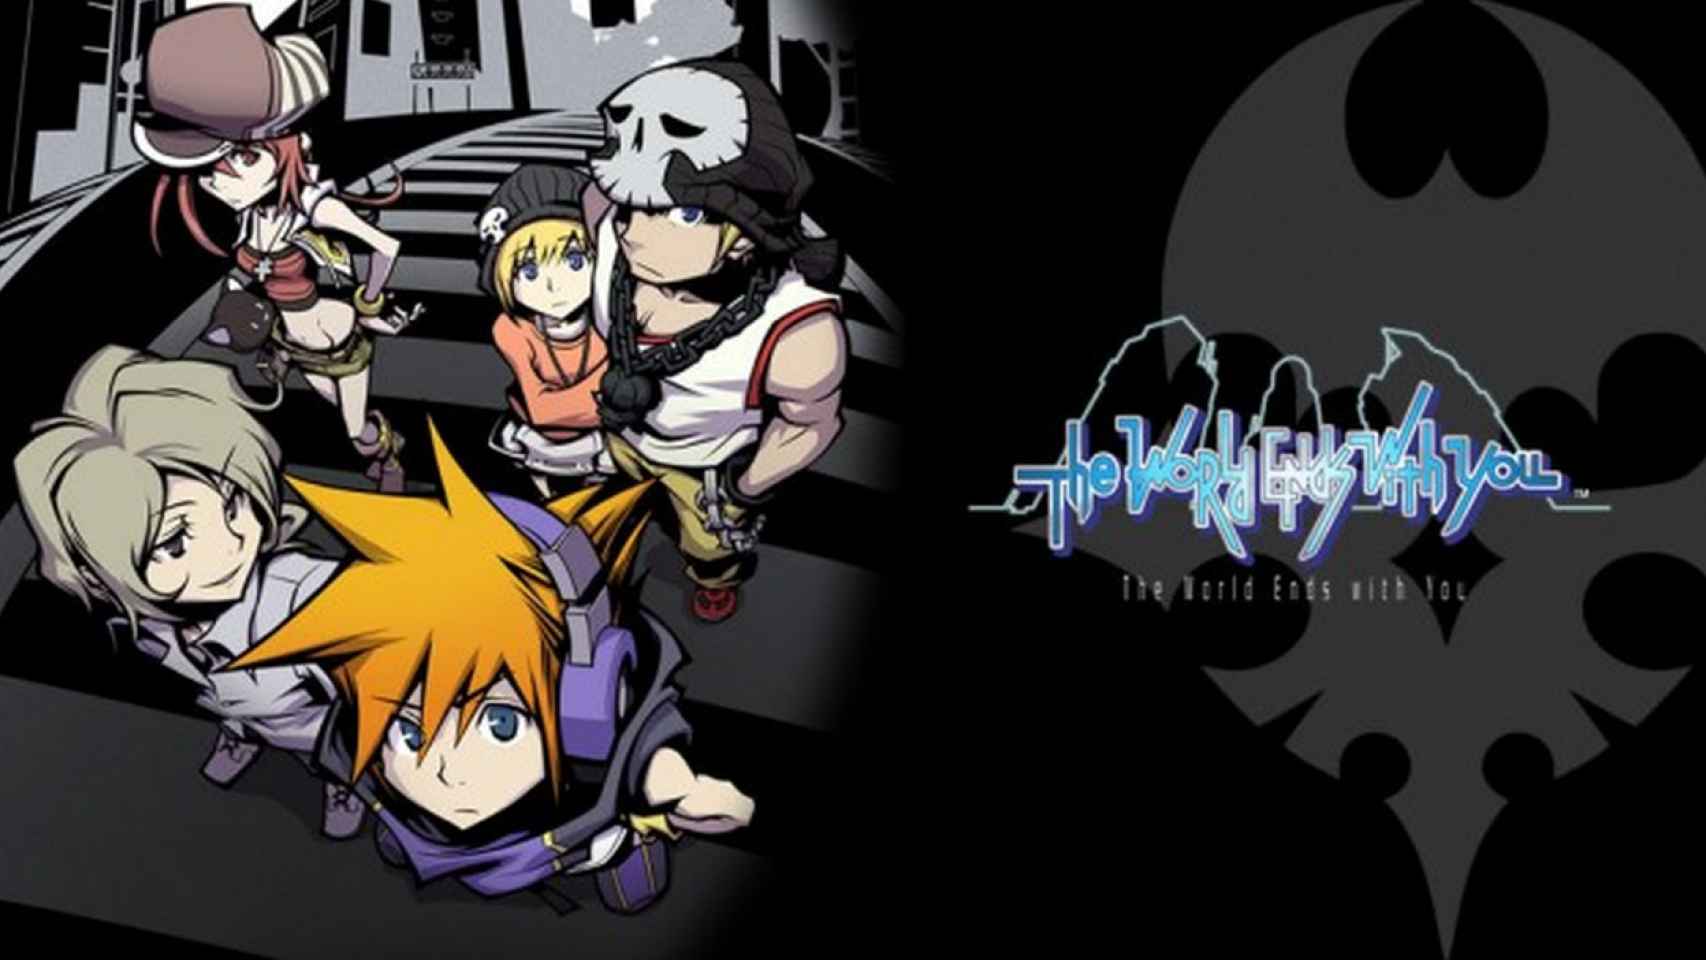 The World Ends With You: el action-RPG de Square Enix para NintendoDS llega a Android